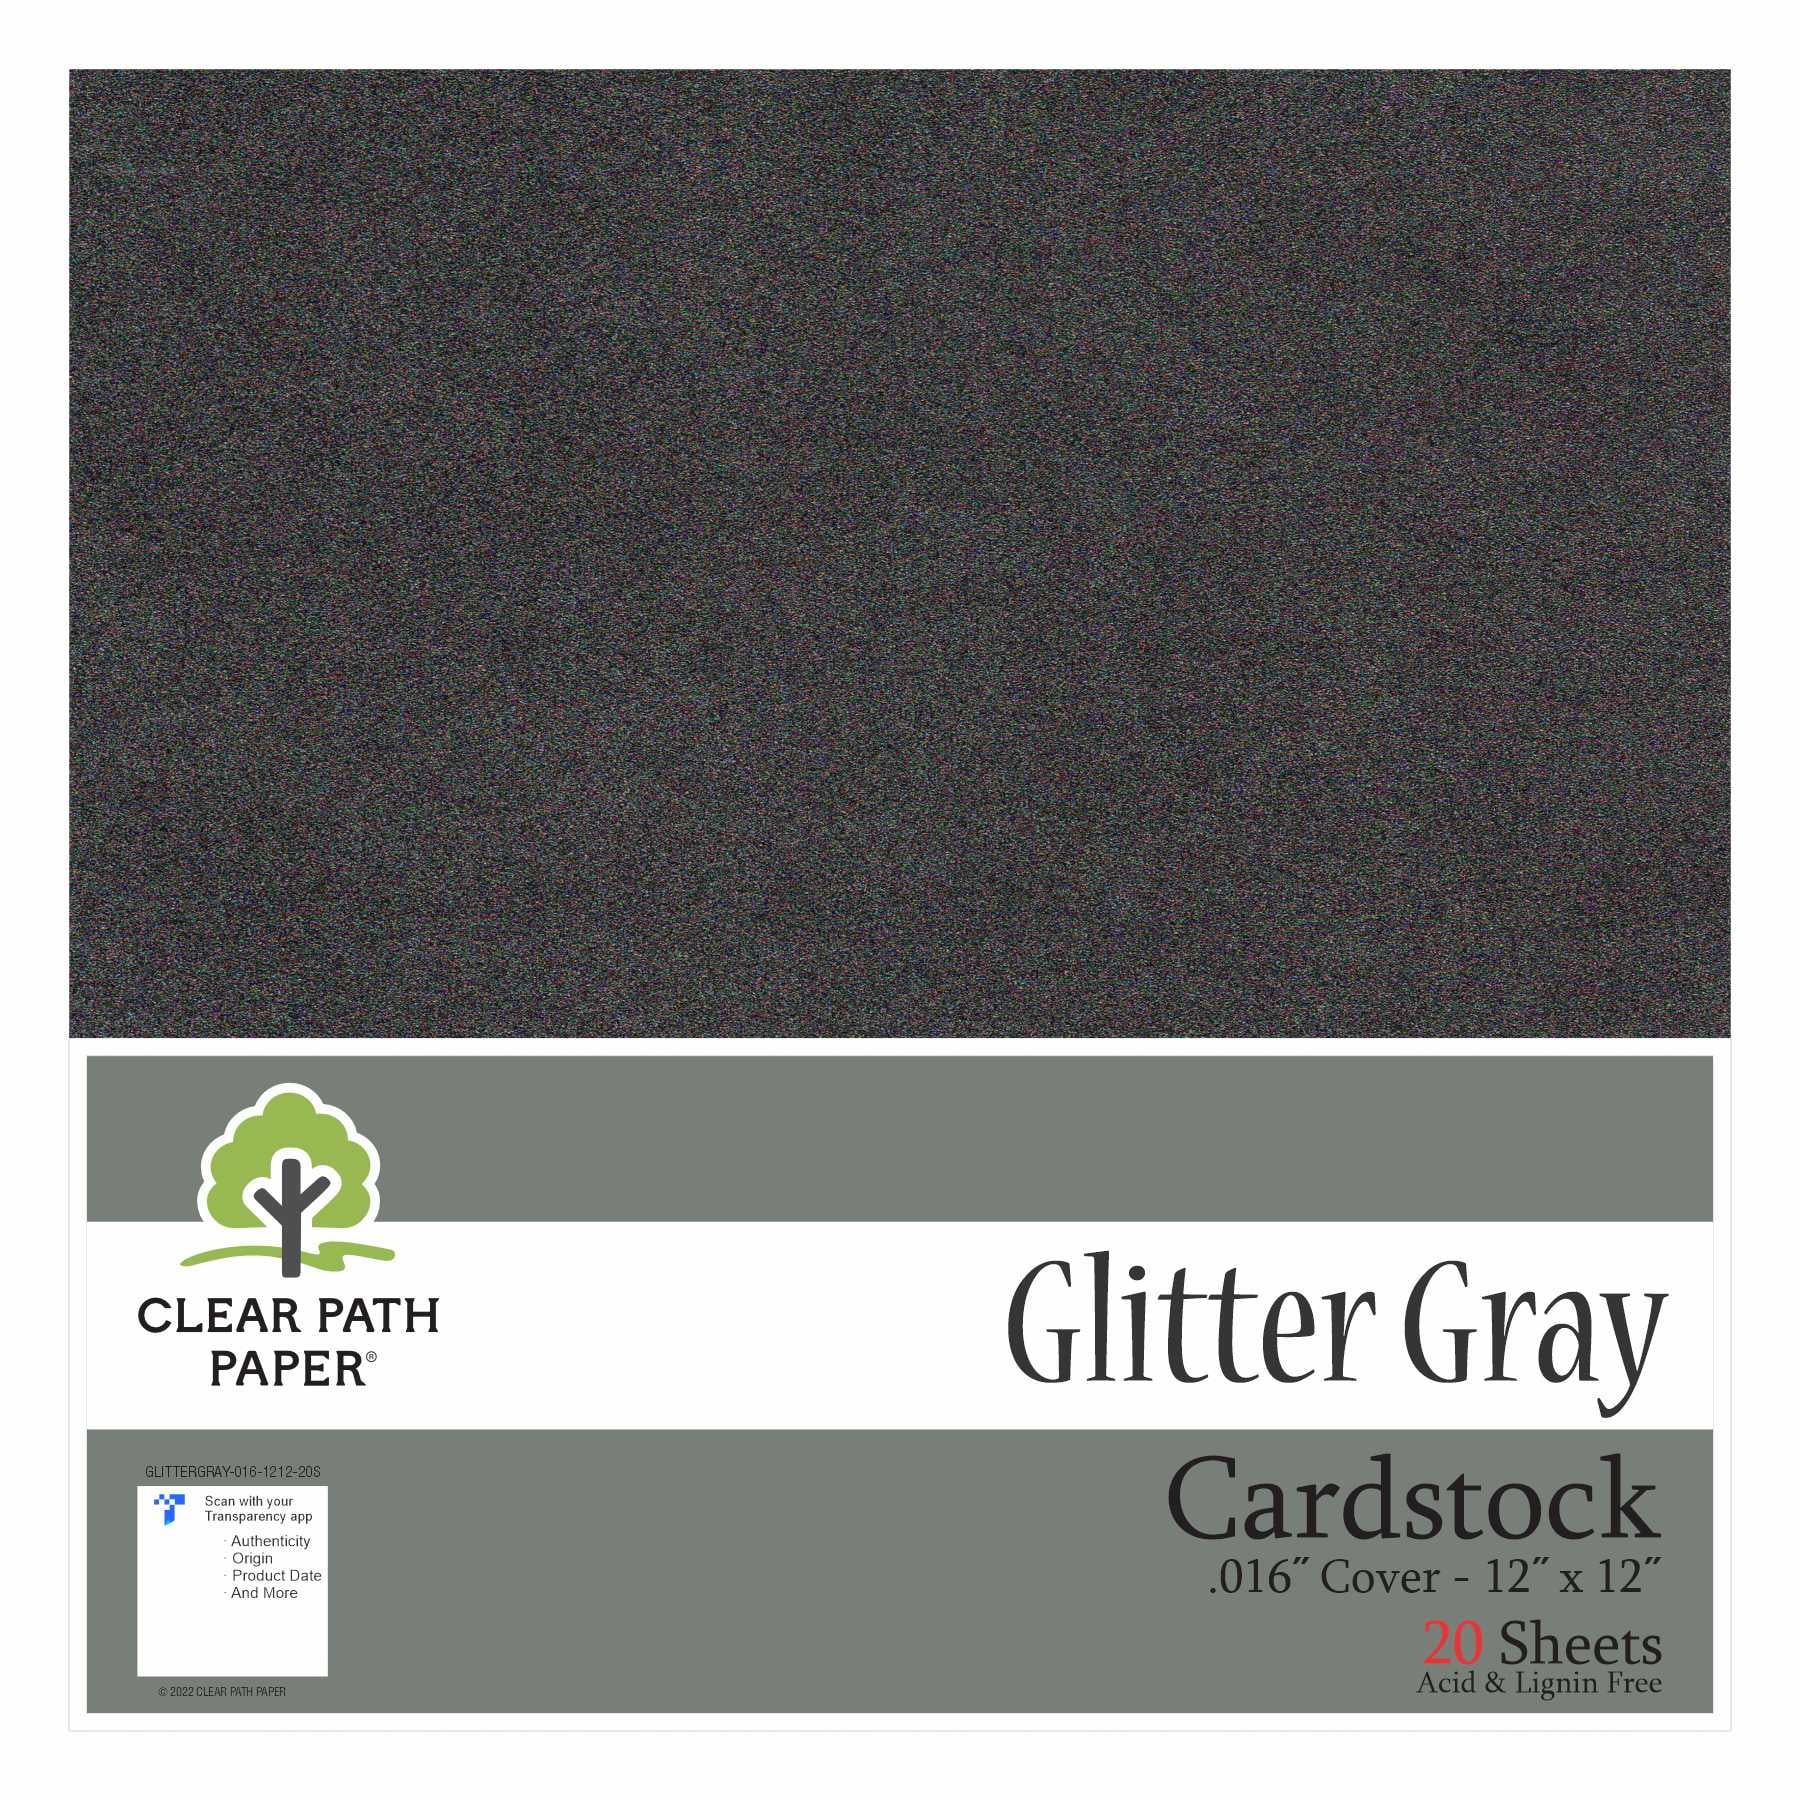 96 Sheet Silver Shimmer Metallic Cardstock, Double-Sided Paper for  Scrapbooking, DIY Projects (8.5x11 In, 250 gsm) 